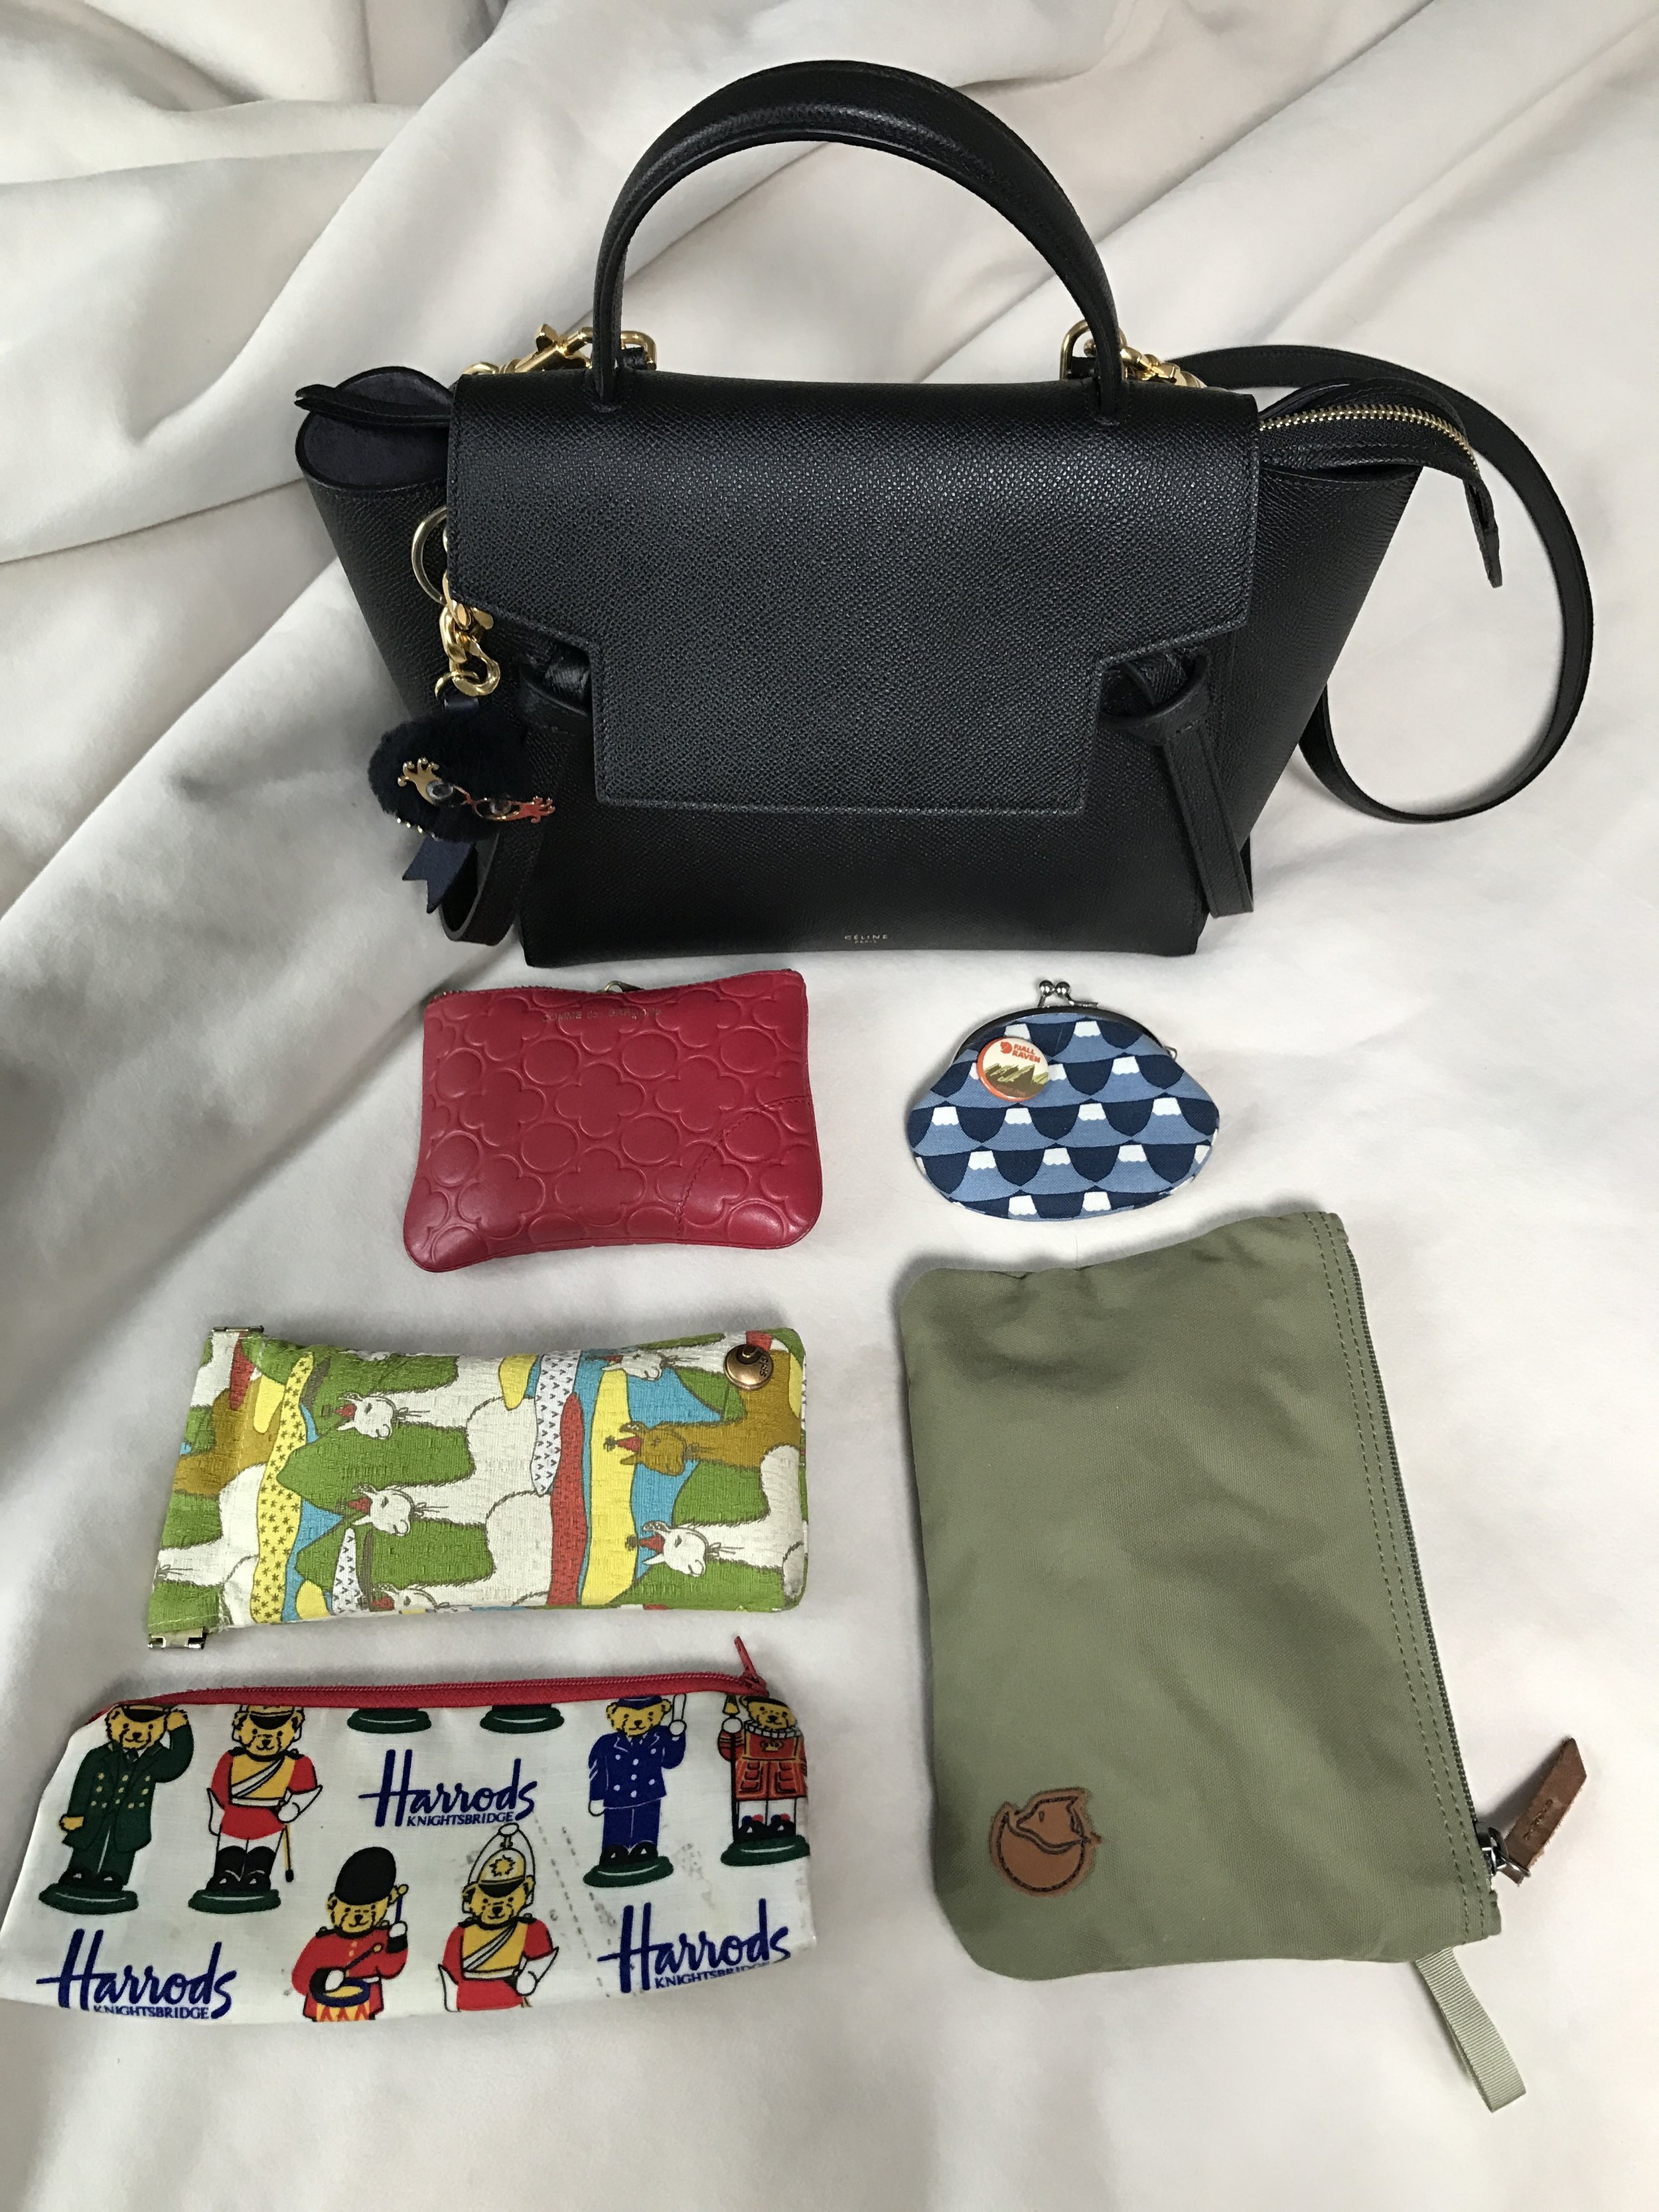 CELINE Micro Belt Bag Review {Updated June 2018} — Fairly Curated